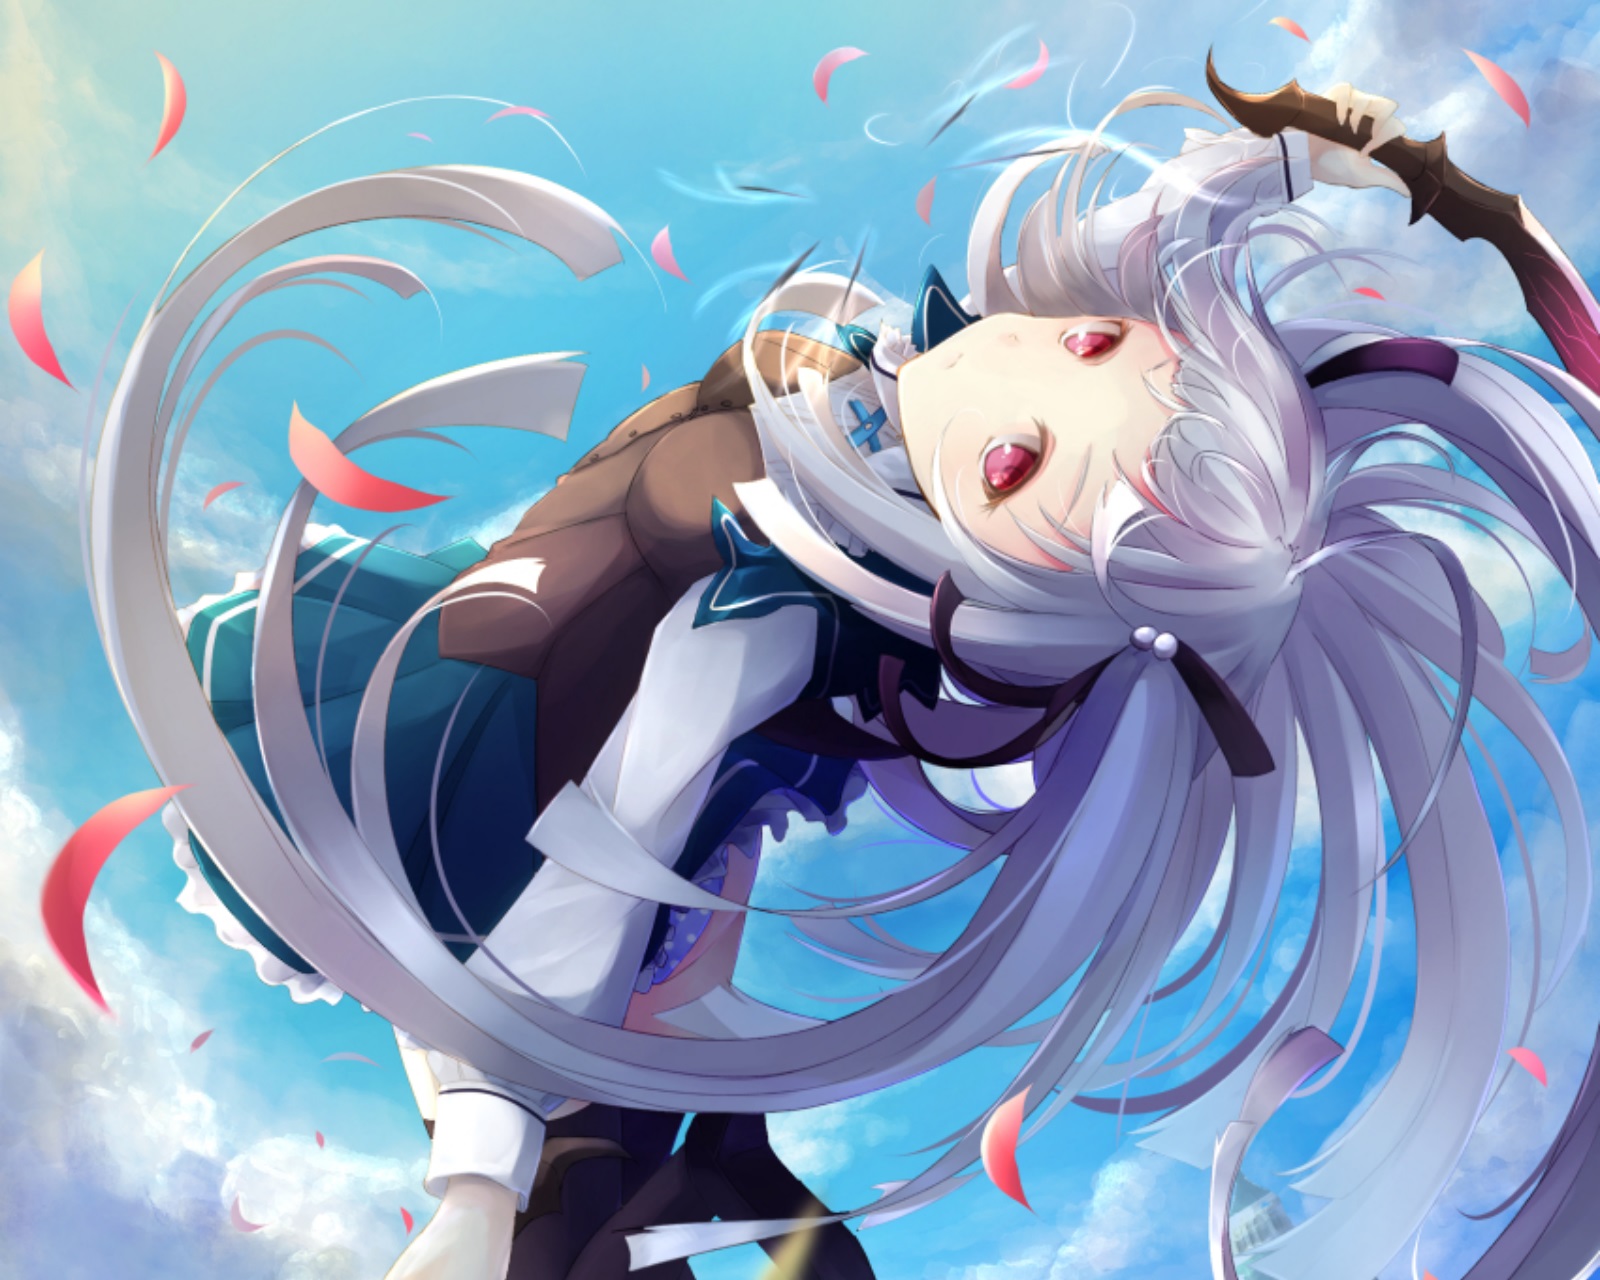 Anime Absolute Duo HD Wallpaper by DinocoZero